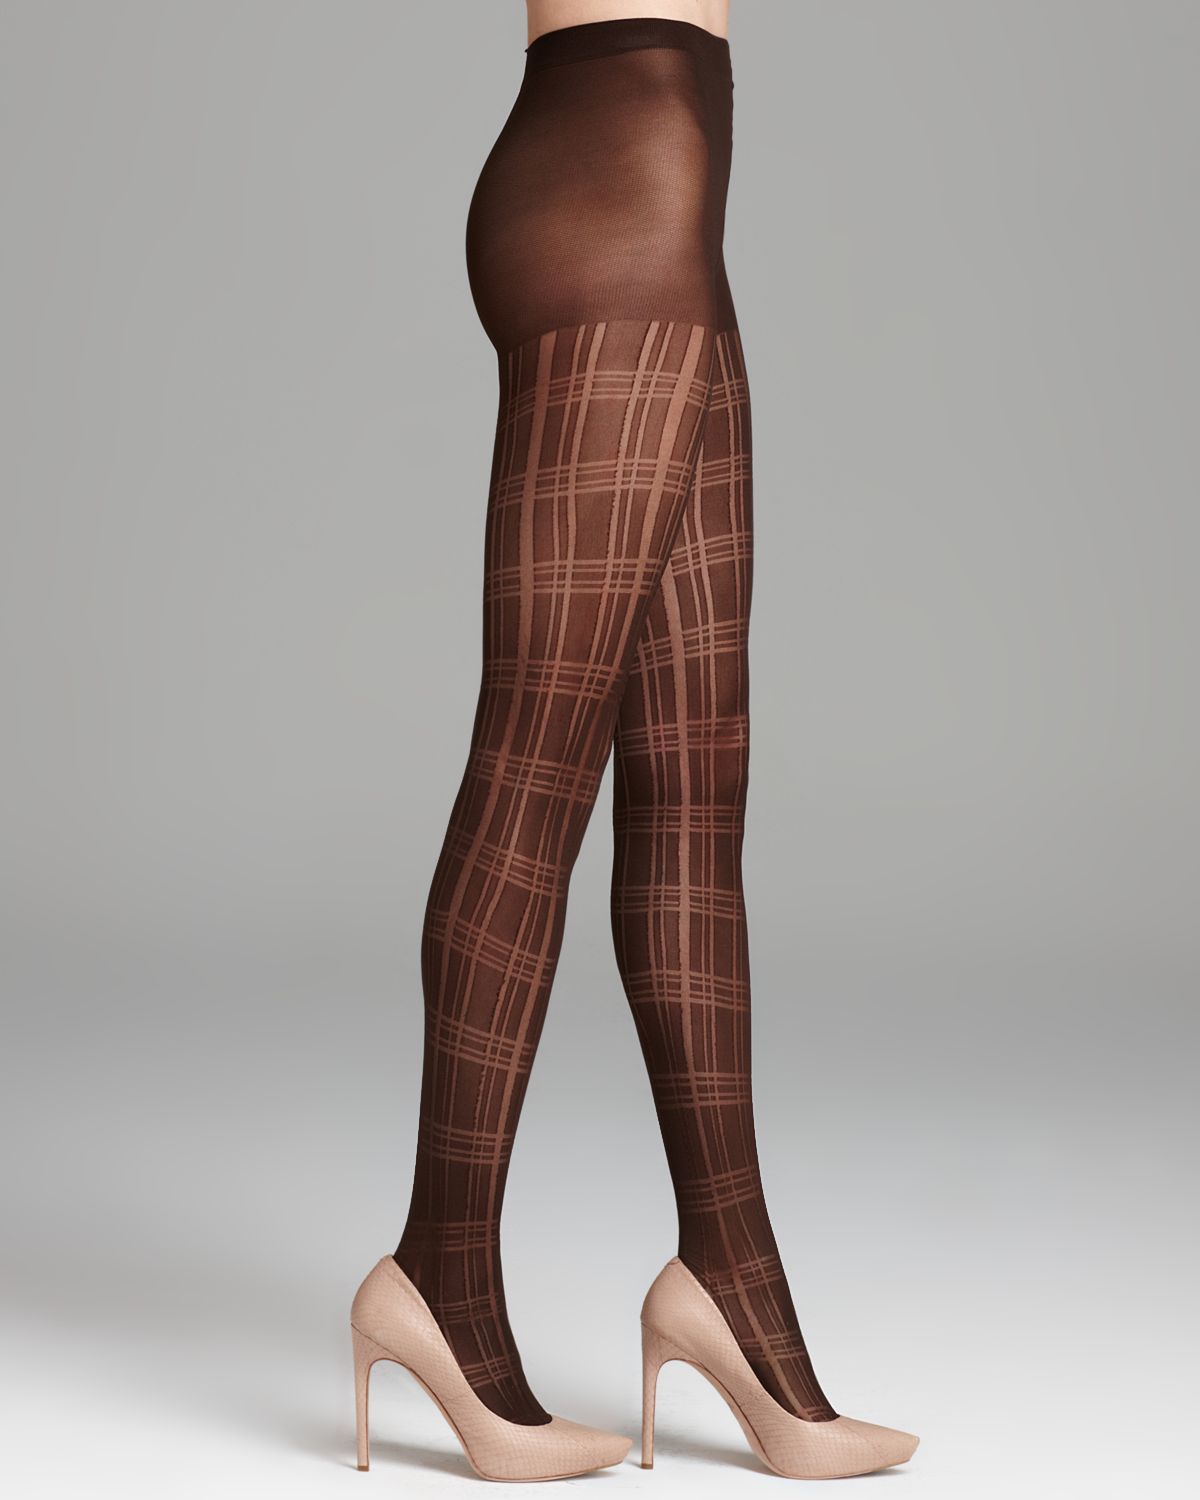 DKNY Bold Plaid Tights in Chocolate (Brown) - Lyst